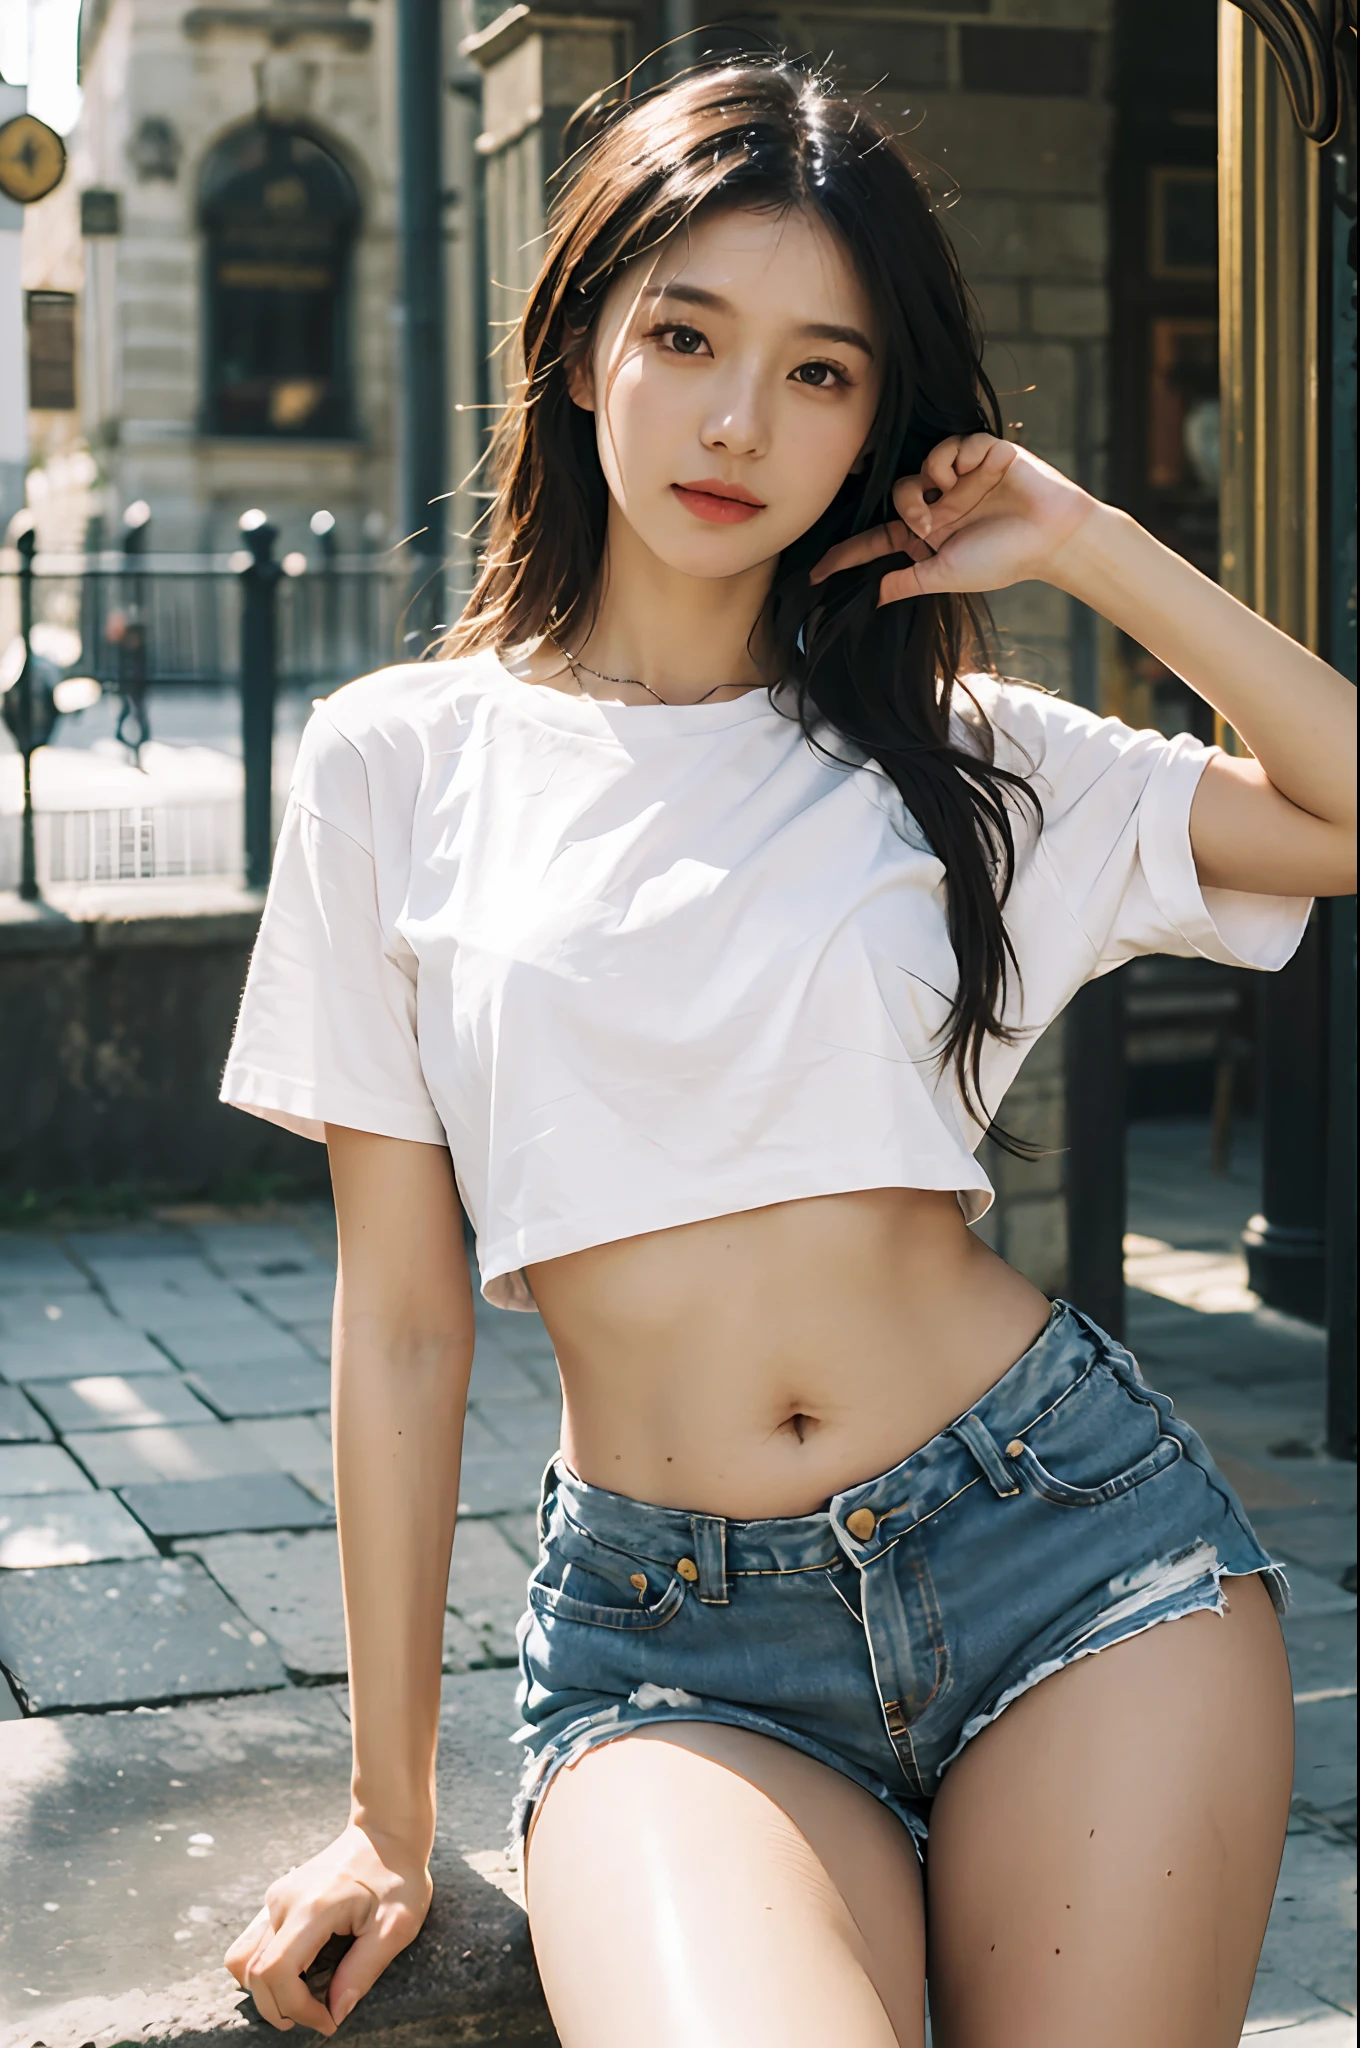 Best Quality, Masterpiece,Ultra High Resolution, (Realistic: 1.4), Original Photo, Official Art, Wallpaper, Bust Photo, Skin,Piazza dei Miracoli Background, Black Eyes, Details, Fingers, 1 Girl,,White Shirt,Belly Navel,Ragged Jean Shorts,Breeze,Sunlight,Water Mist,Studio light,